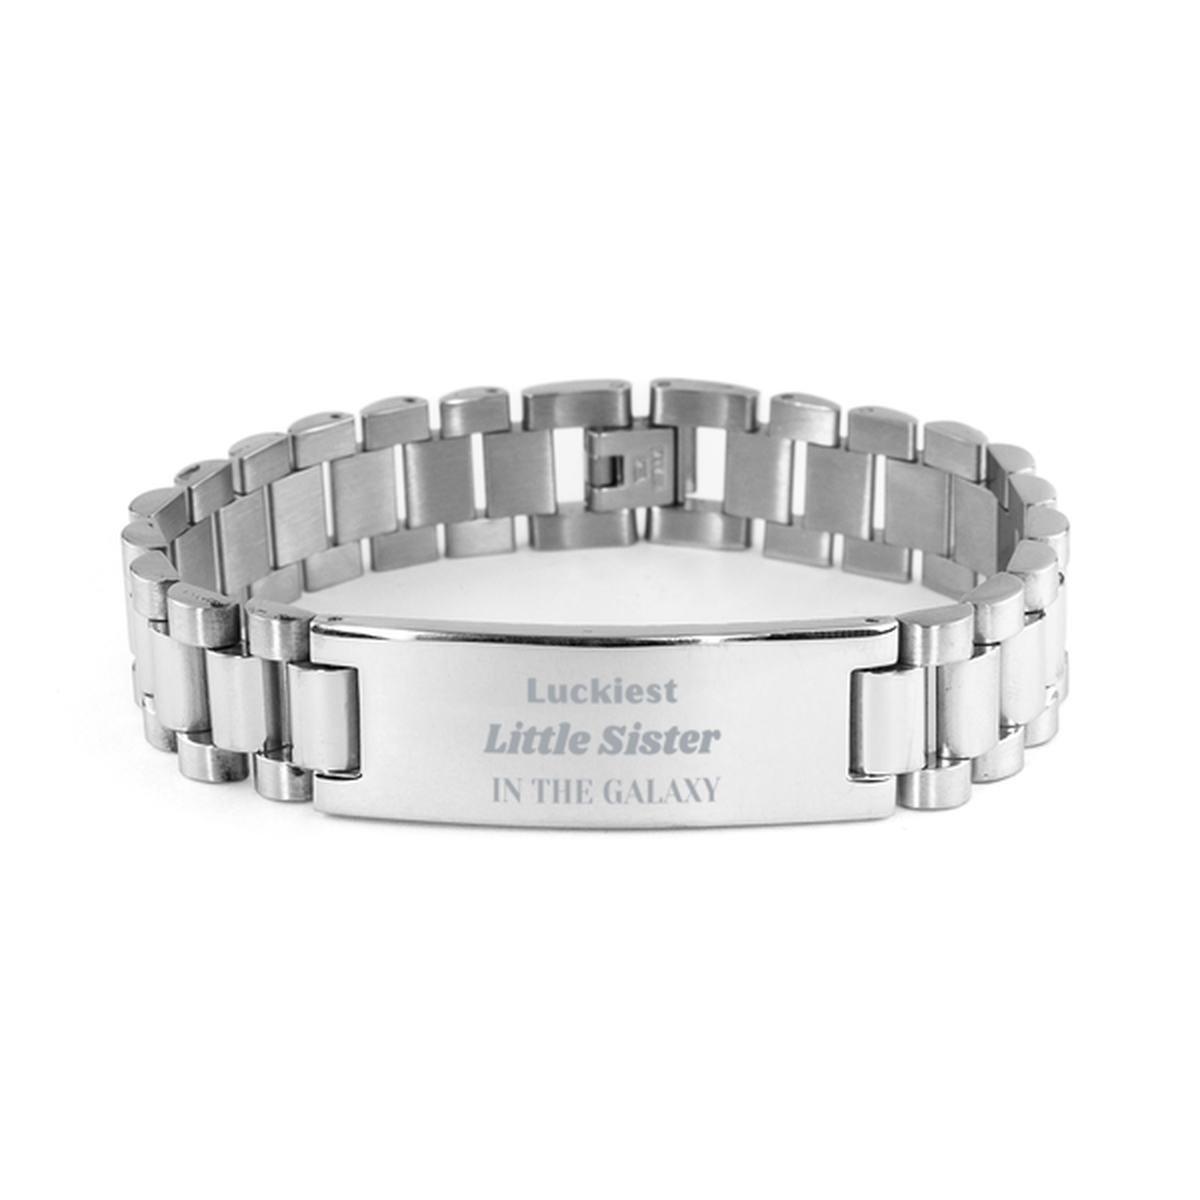 Luckiest Little Sister in the Galaxy, To My Little Sister Engraved Gifts, Christmas Little Sister Ladder Stainless Steel Bracelet Gifts, X-mas Birthday Unique Gifts For Little Sister Men Women